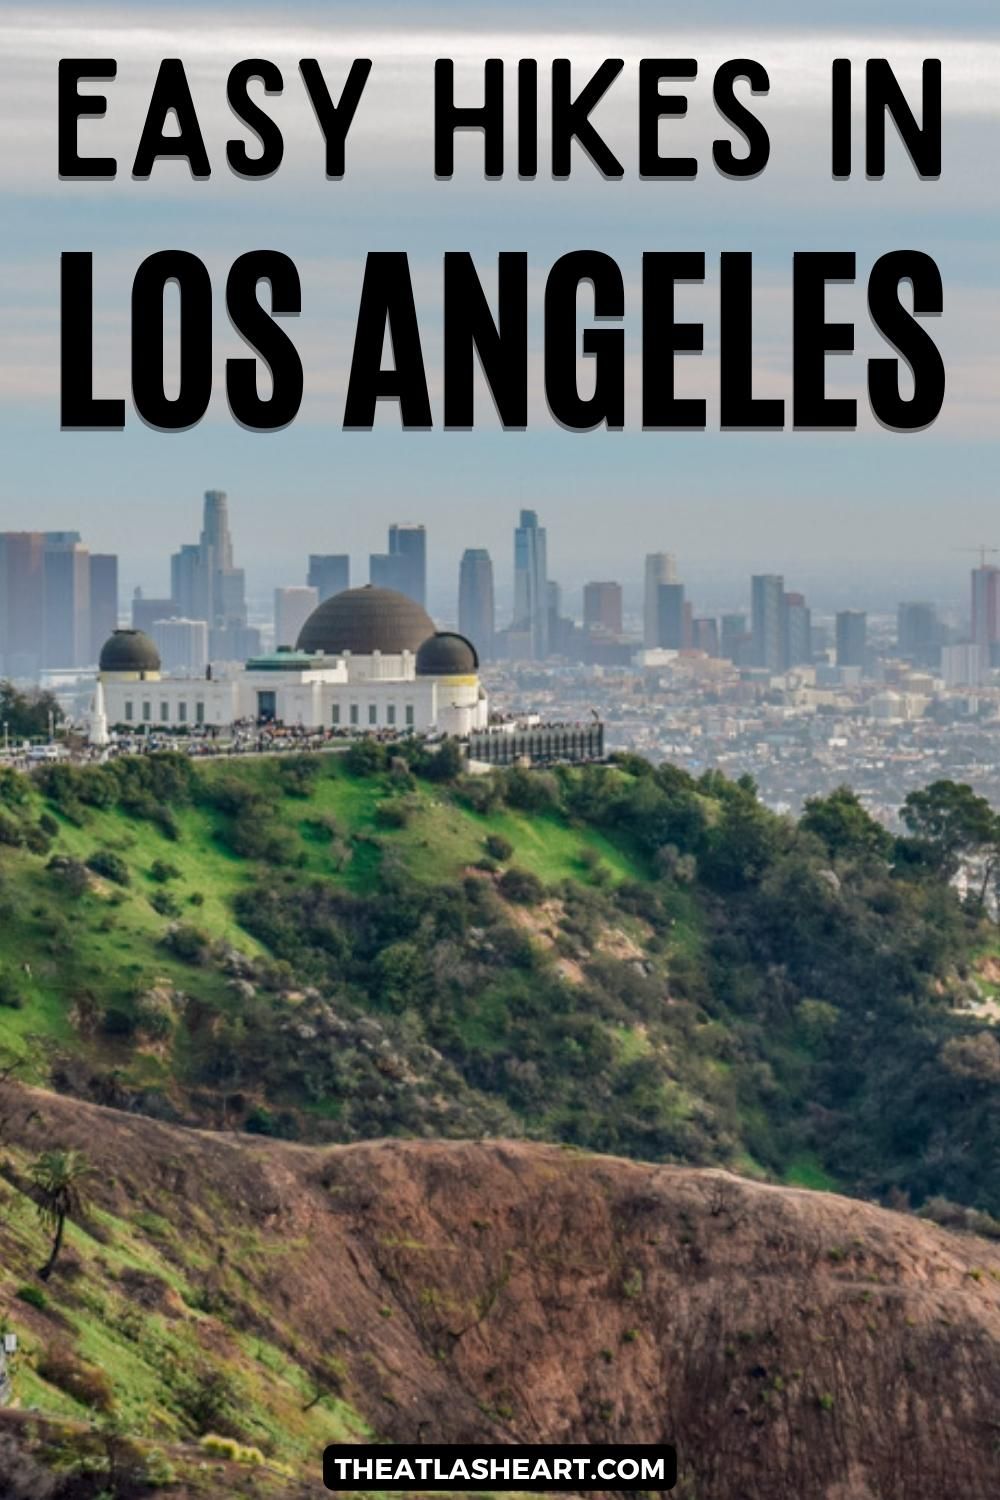 A view of Griffith Observatory on the top of a green hill, with the sprawl of Los Angeles and a hazy sky in the background, and the text overlay, "Easy Hikes in Los Angeles."